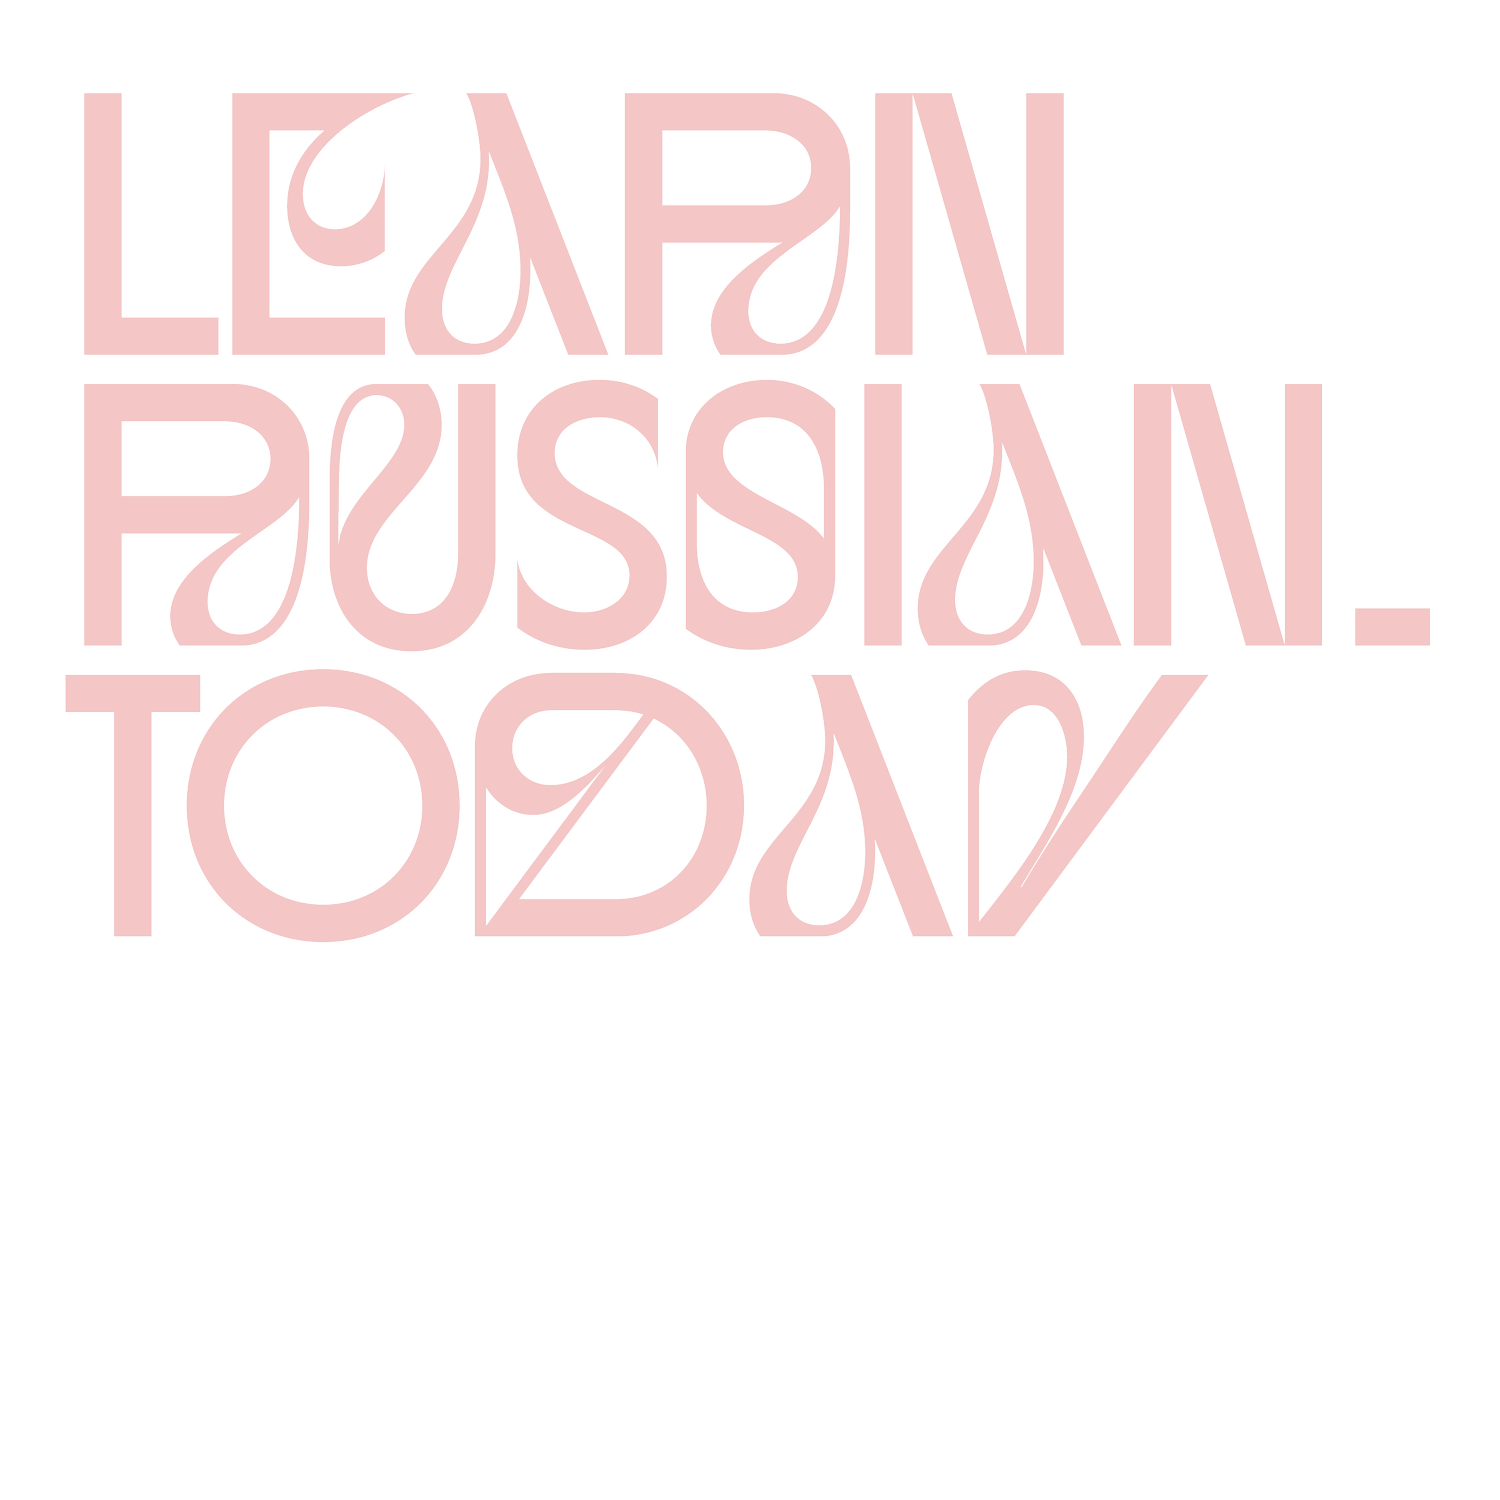 Learn Russian Today